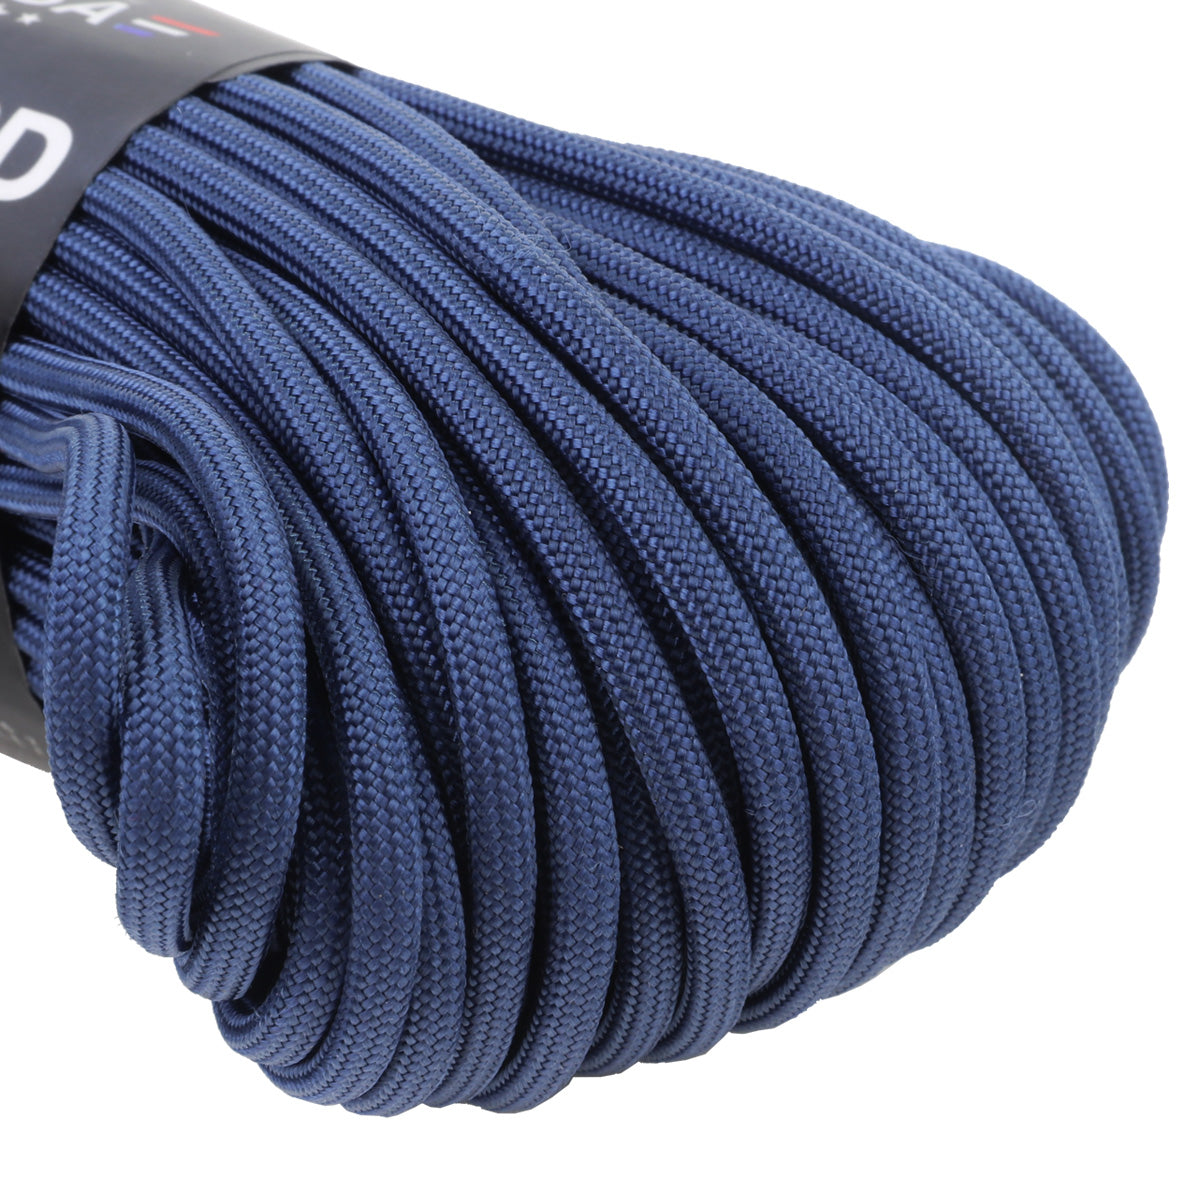 Atwood Rope MFG Ready Rope™ 550 Paracord 100 Feet 7-String Core Nylon  Parachute Cord Outside Survival Gear Made in USA | Lanyards, Bracelets,  Handle